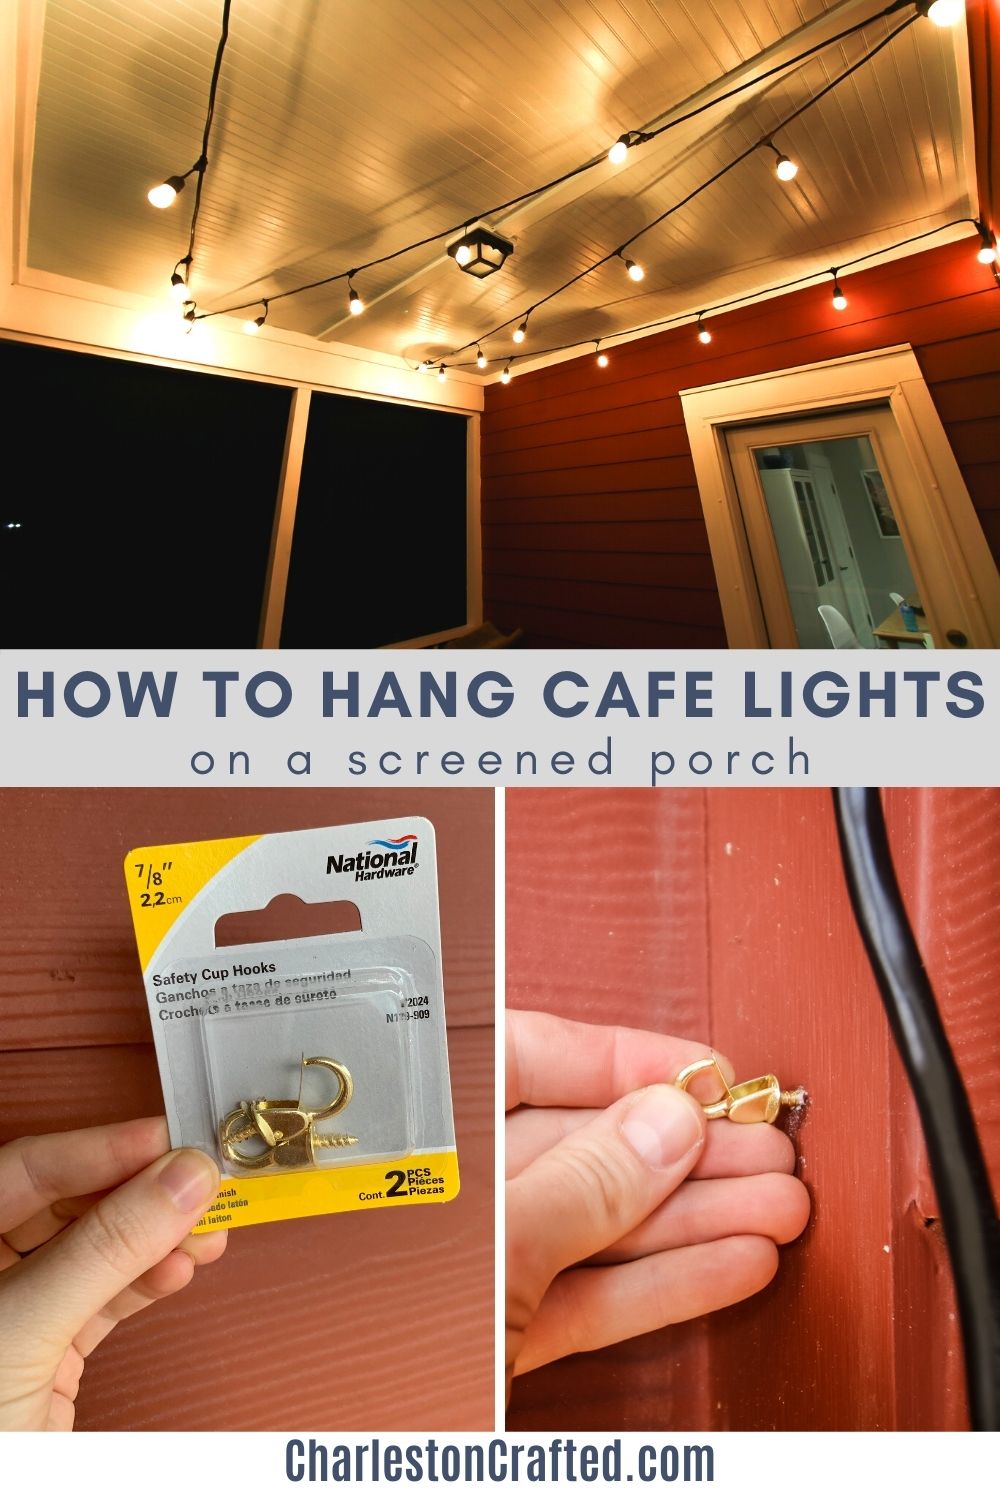 https://www.charlestoncrafted.com/wp-content/uploads/2021/01/how-to-hang-cafe-lights-on-a-screened-porch.jpg